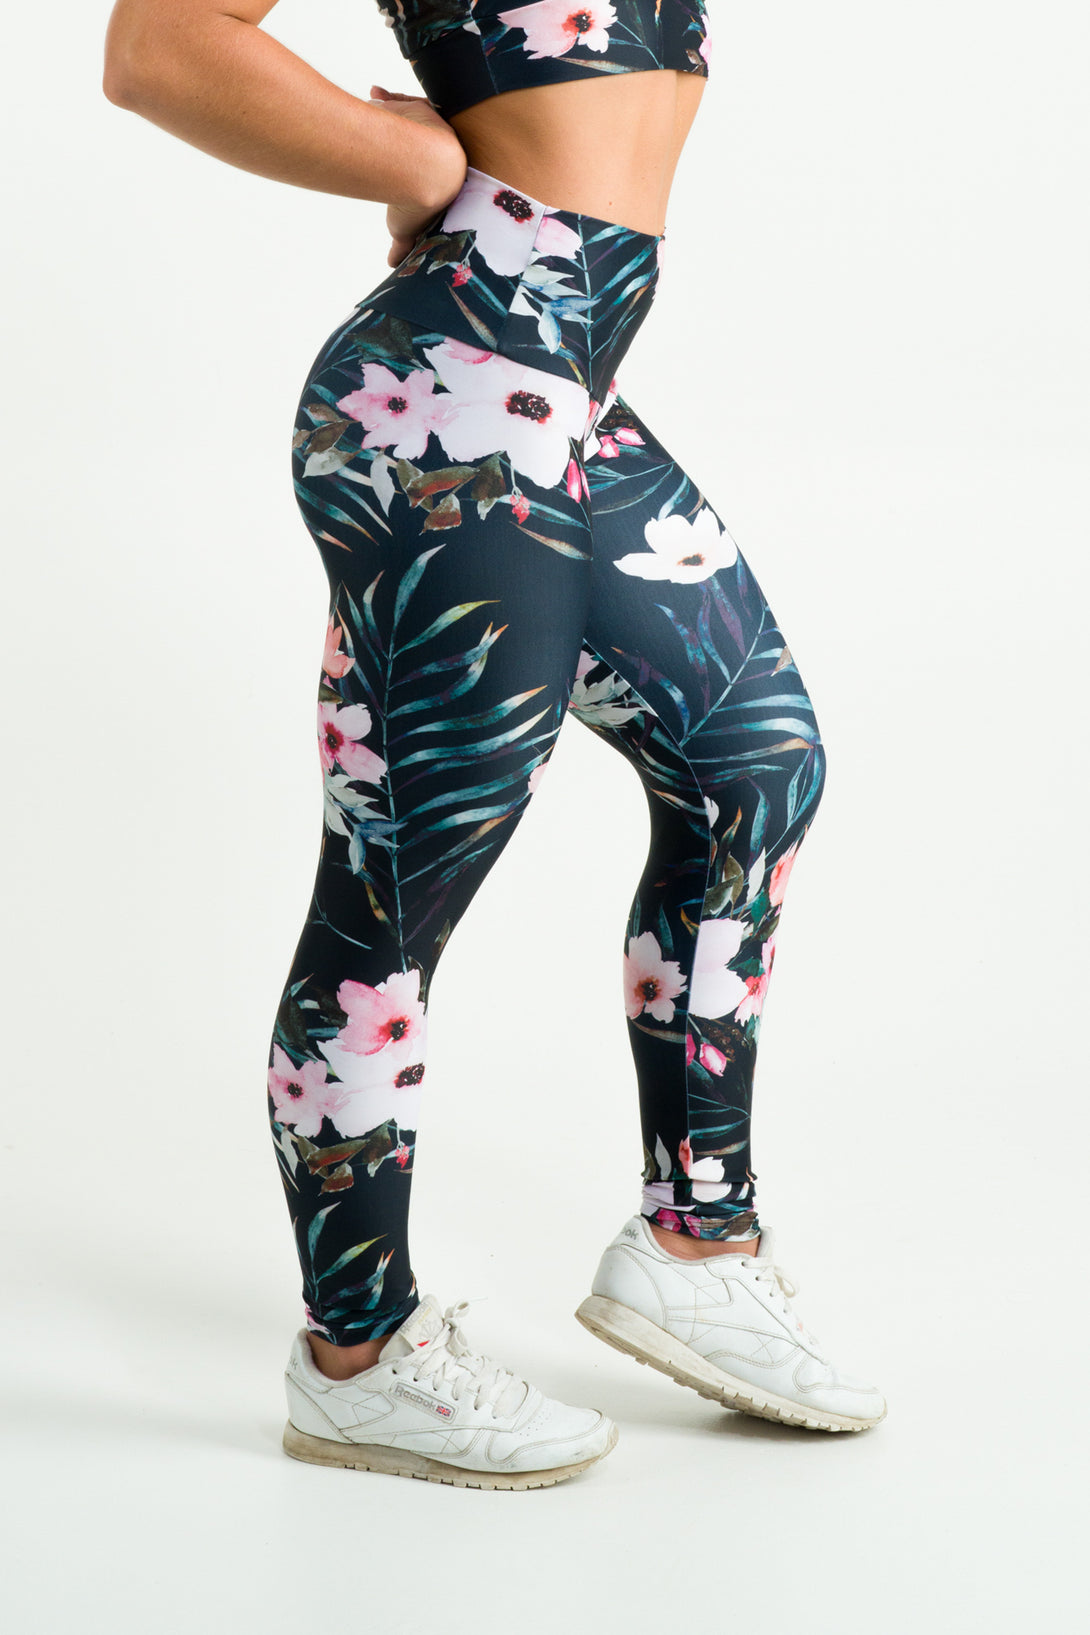 Exotic At Heart Performance - High Waisted Leggings - Exoticathletica